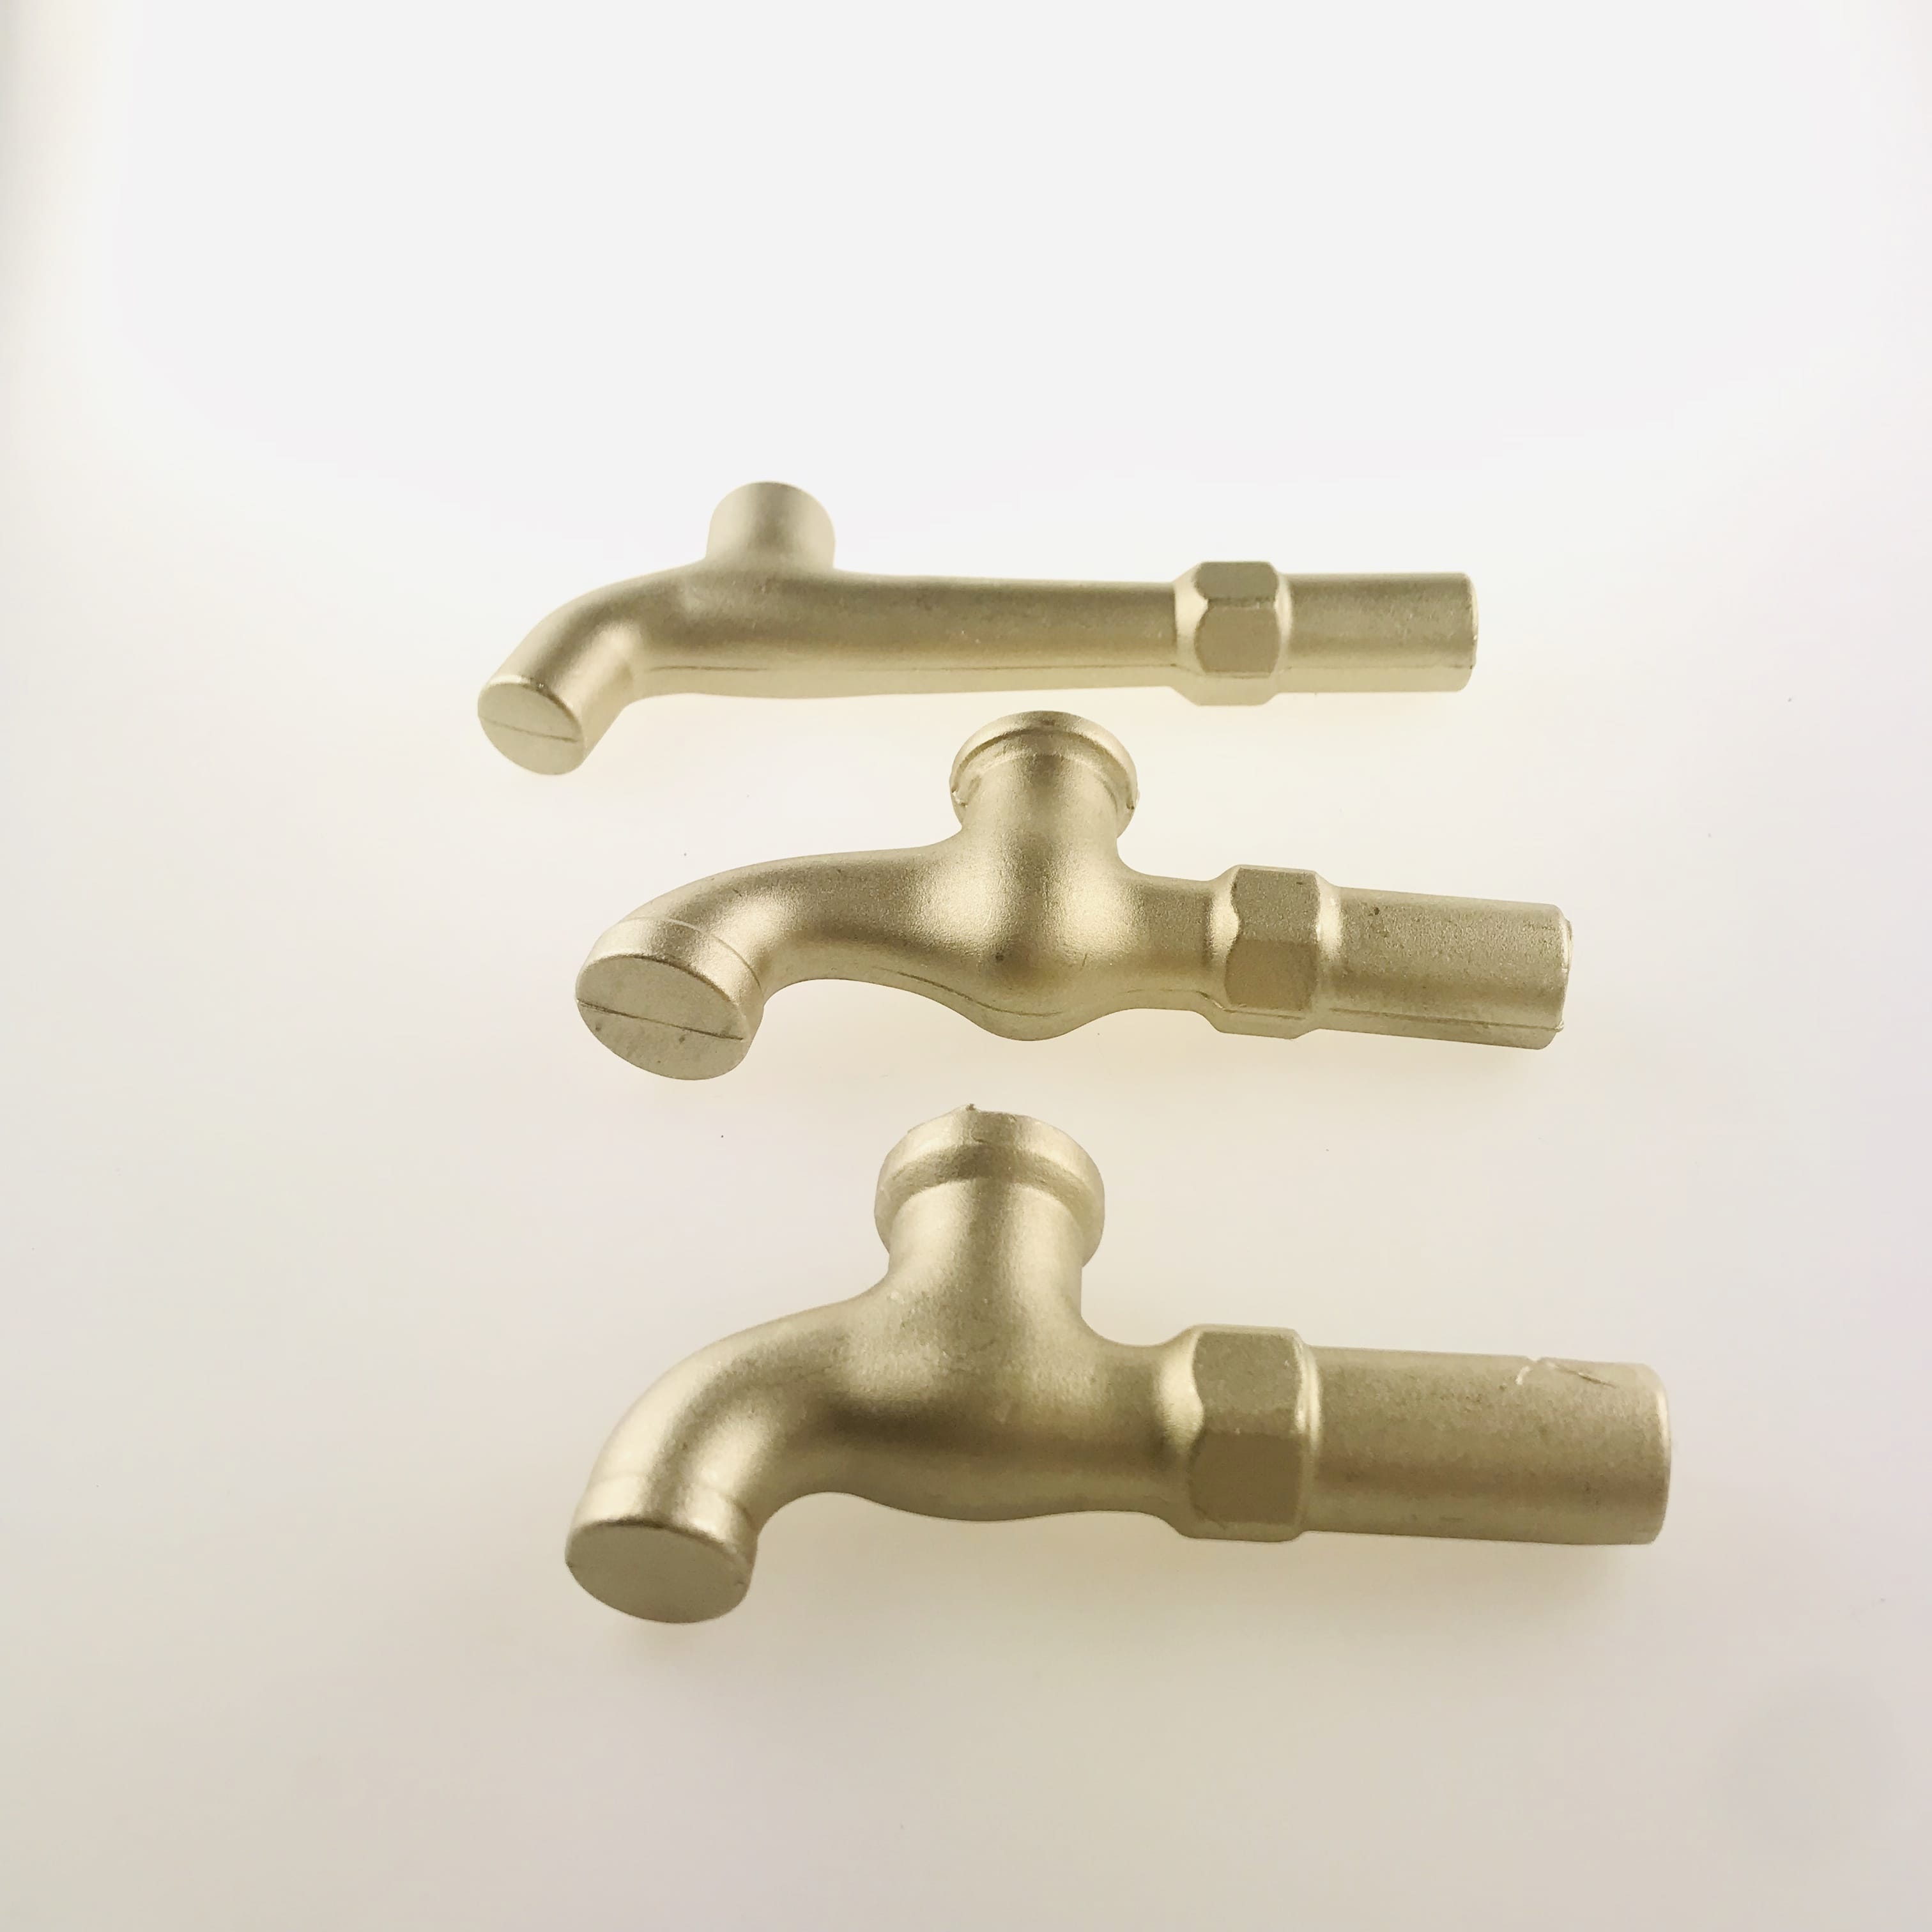 OEM brass plumbing fittings Forged High Pressure Pipe Fittings brass compression fittings Support product customization (8)